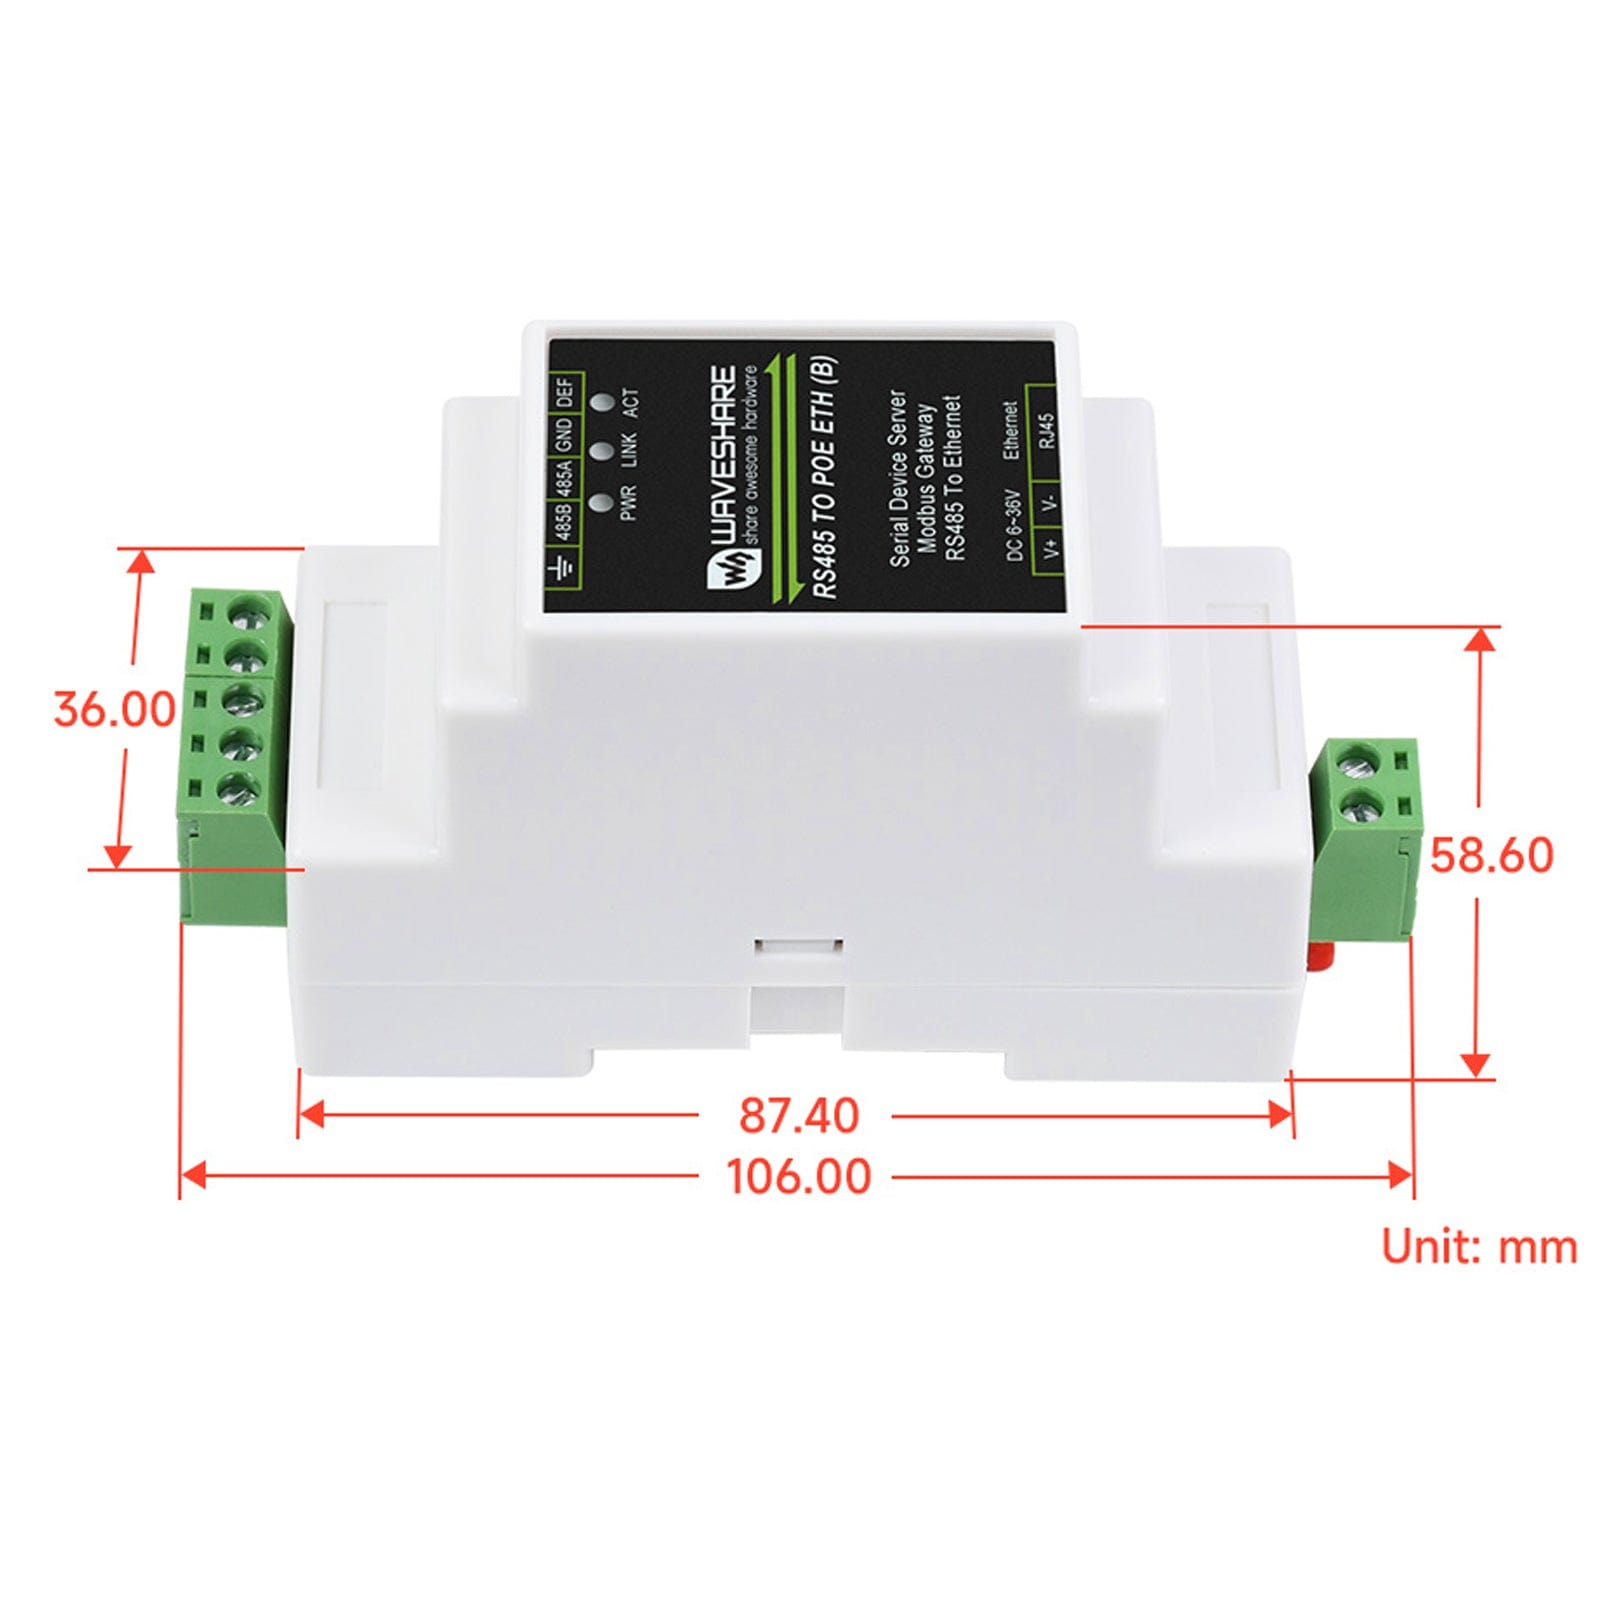 RS485 To RJ45 Ethernet Module - The Pi Hut